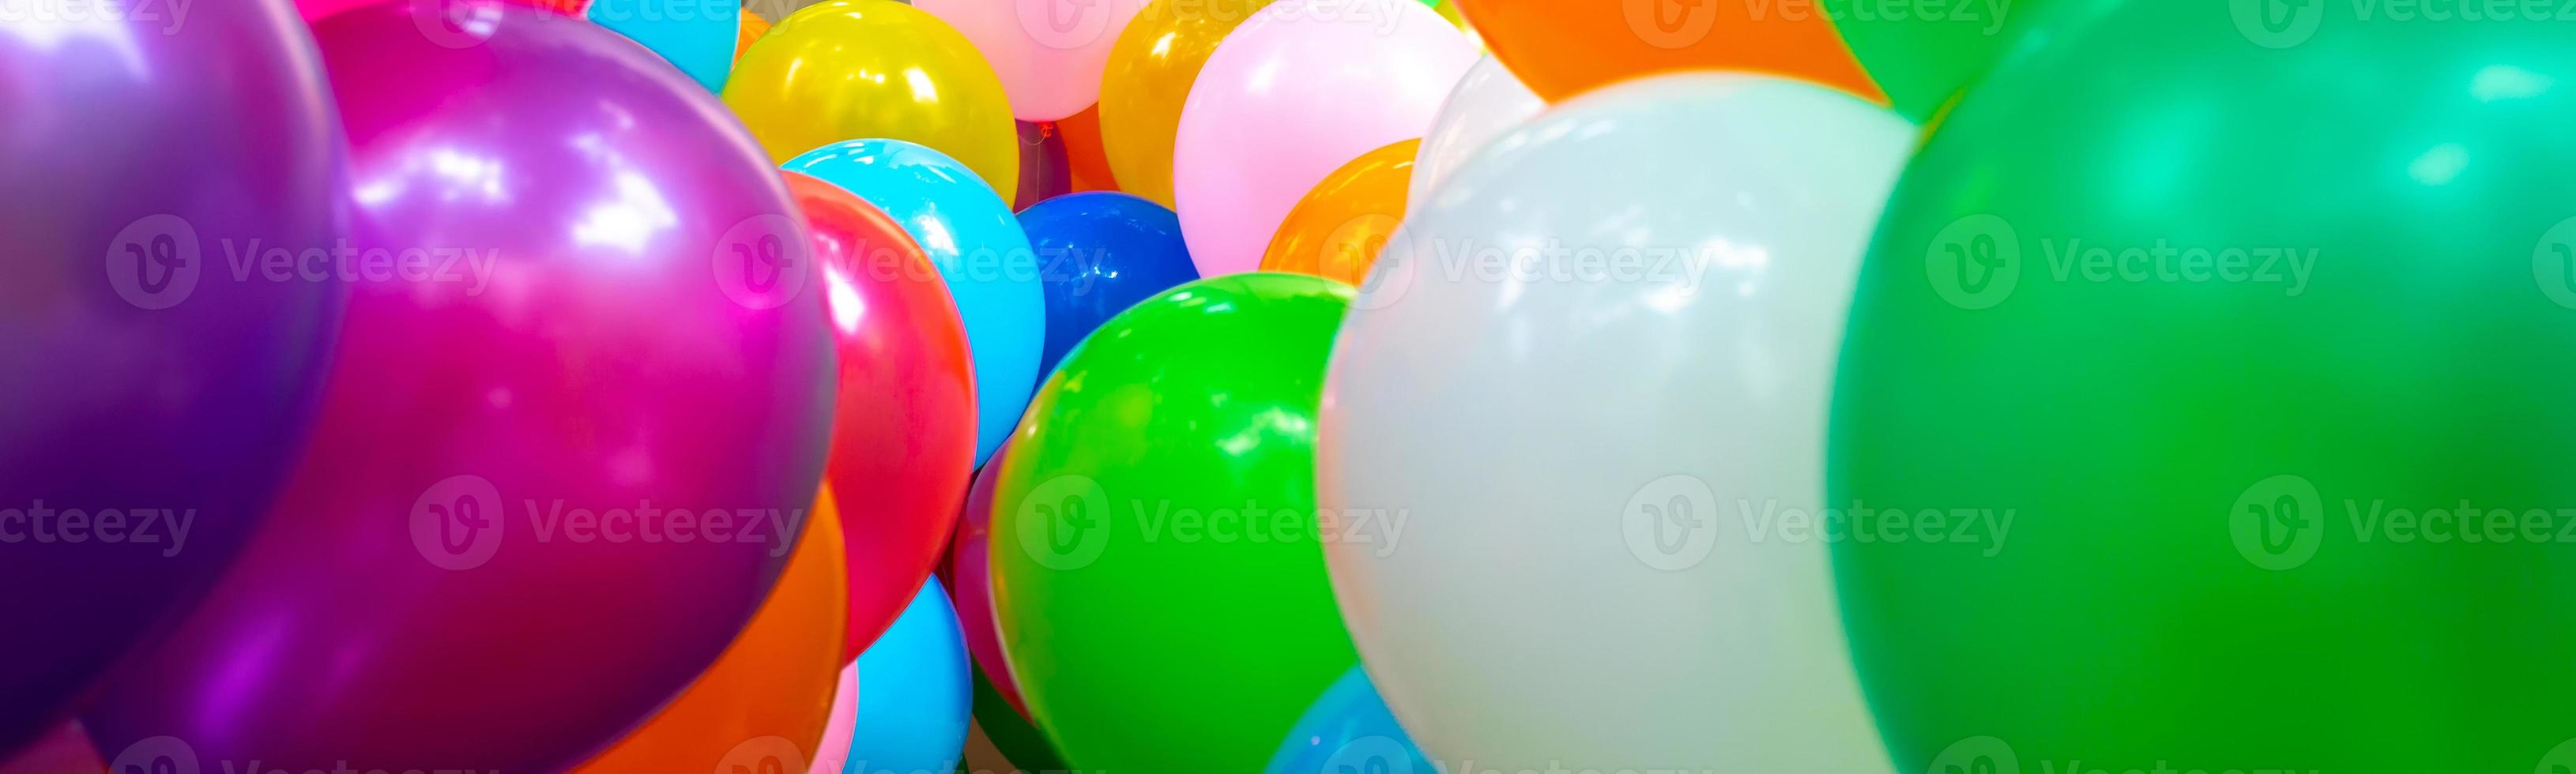 Colorful gas-filled balloons close-up and panoramic views. photo